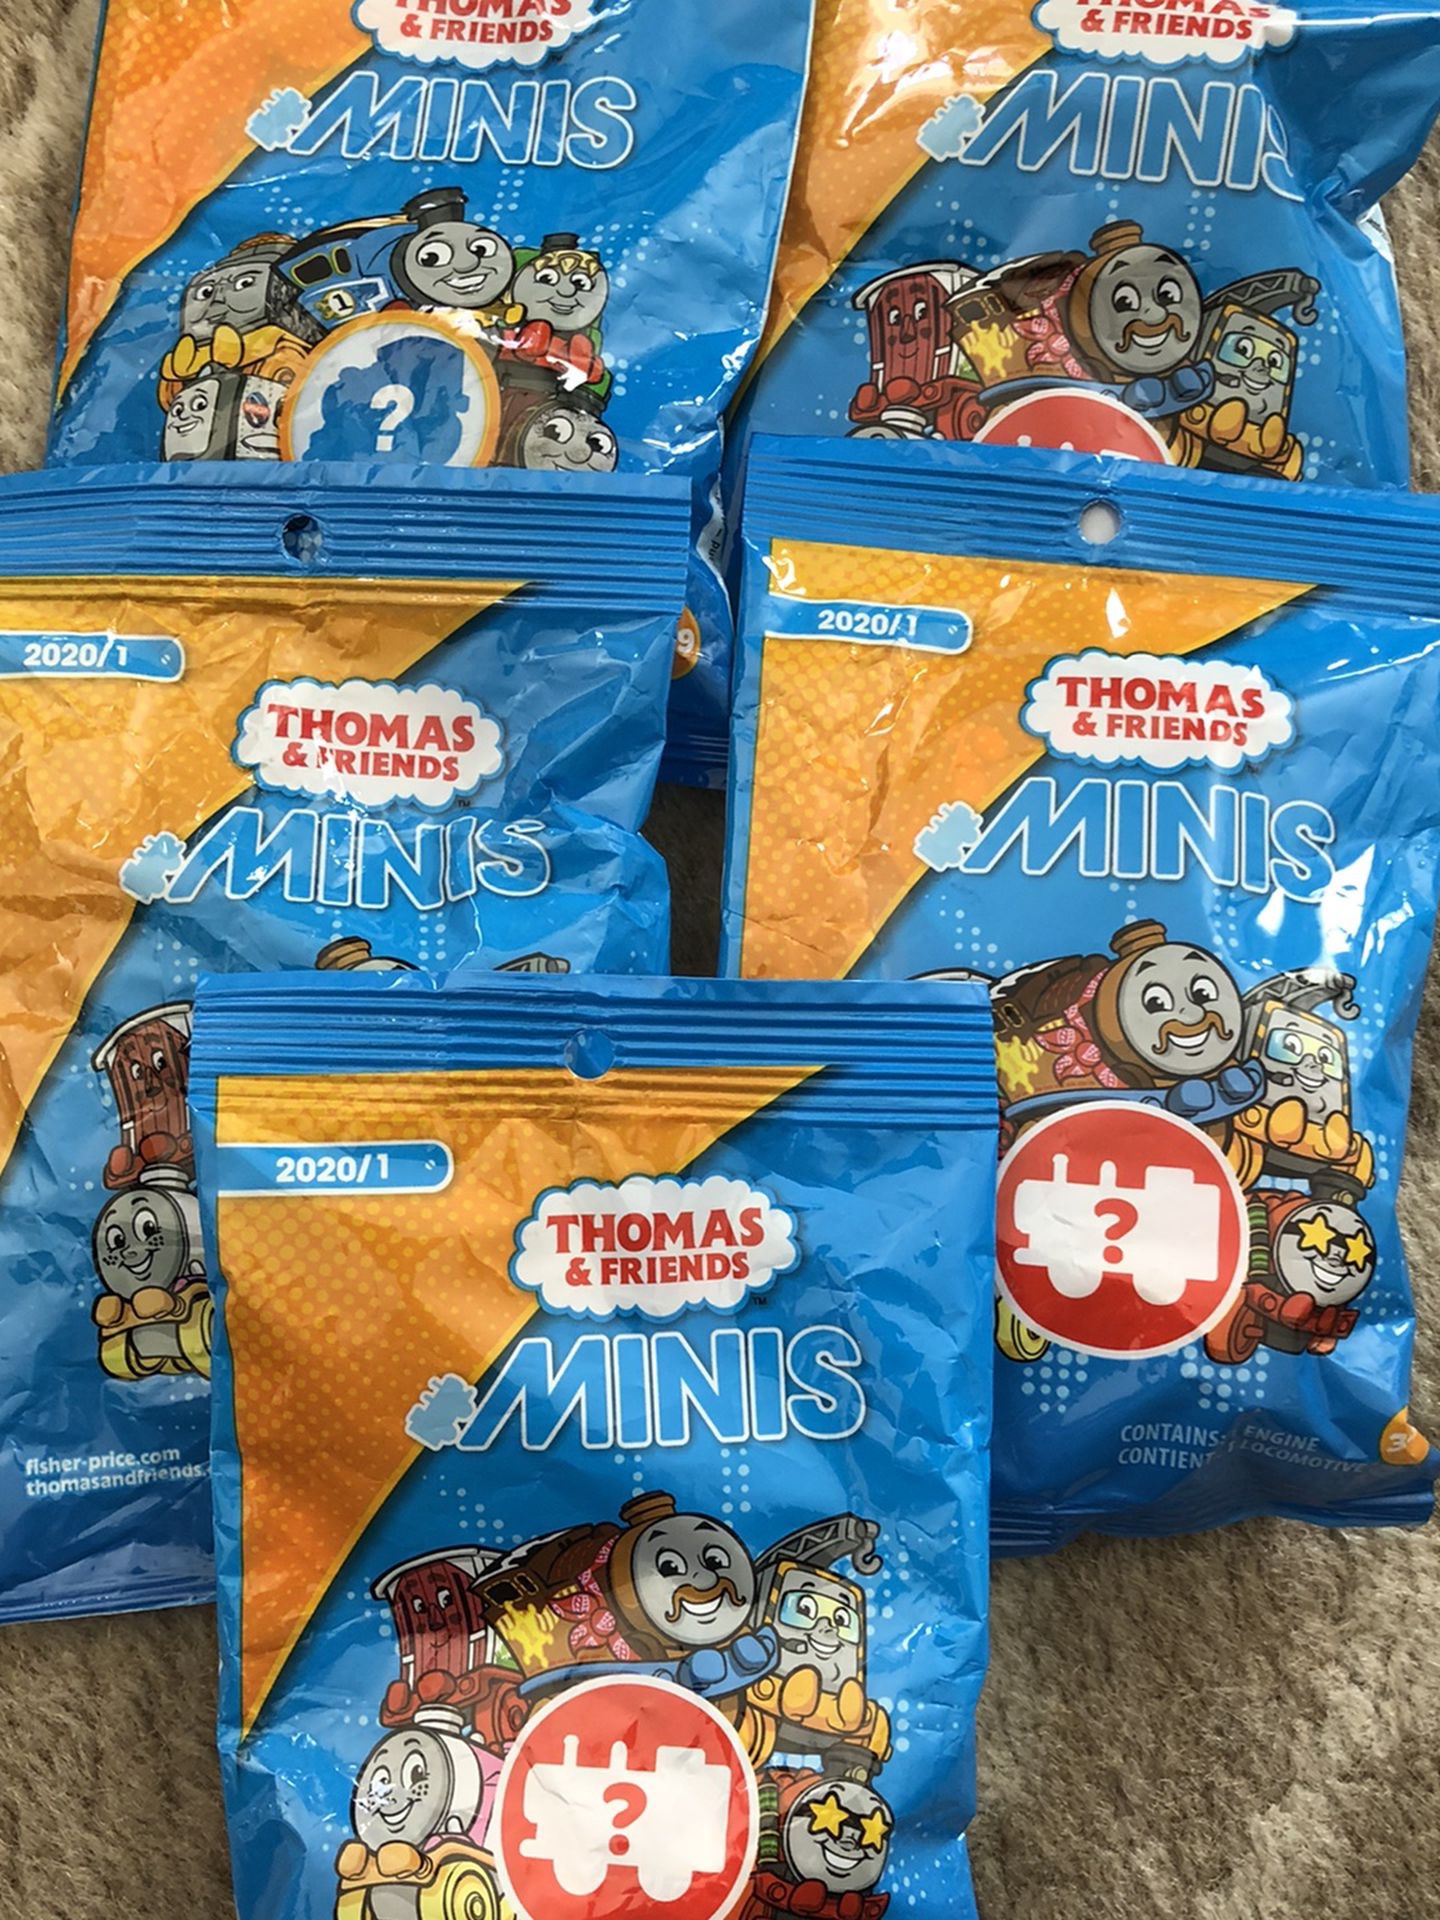 Thomas and friends minis.